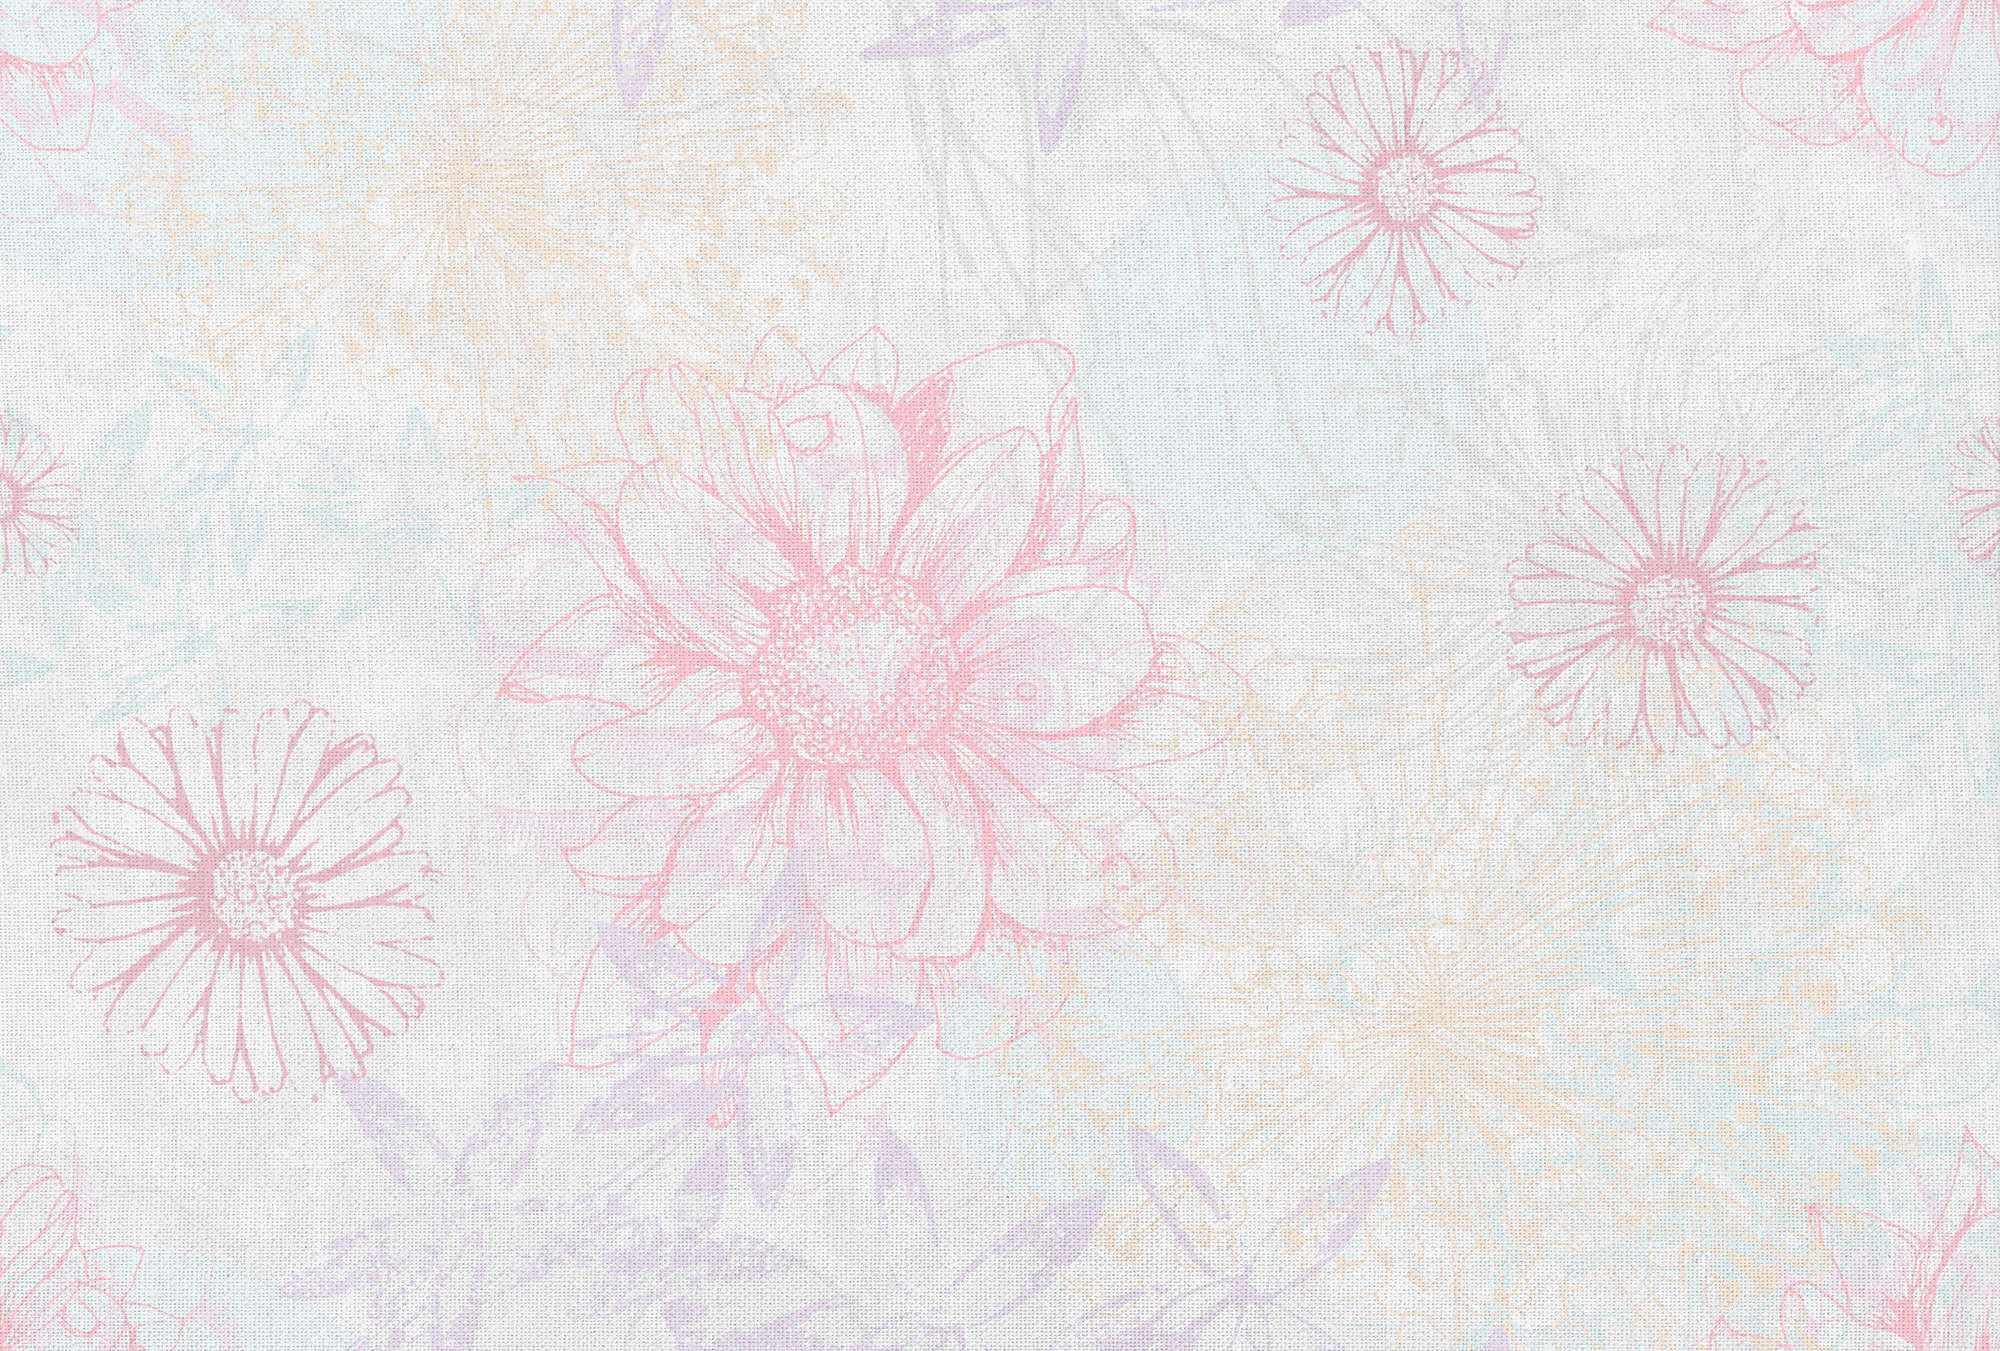             Linen look & floral pattern mural - pink, white, blue
        